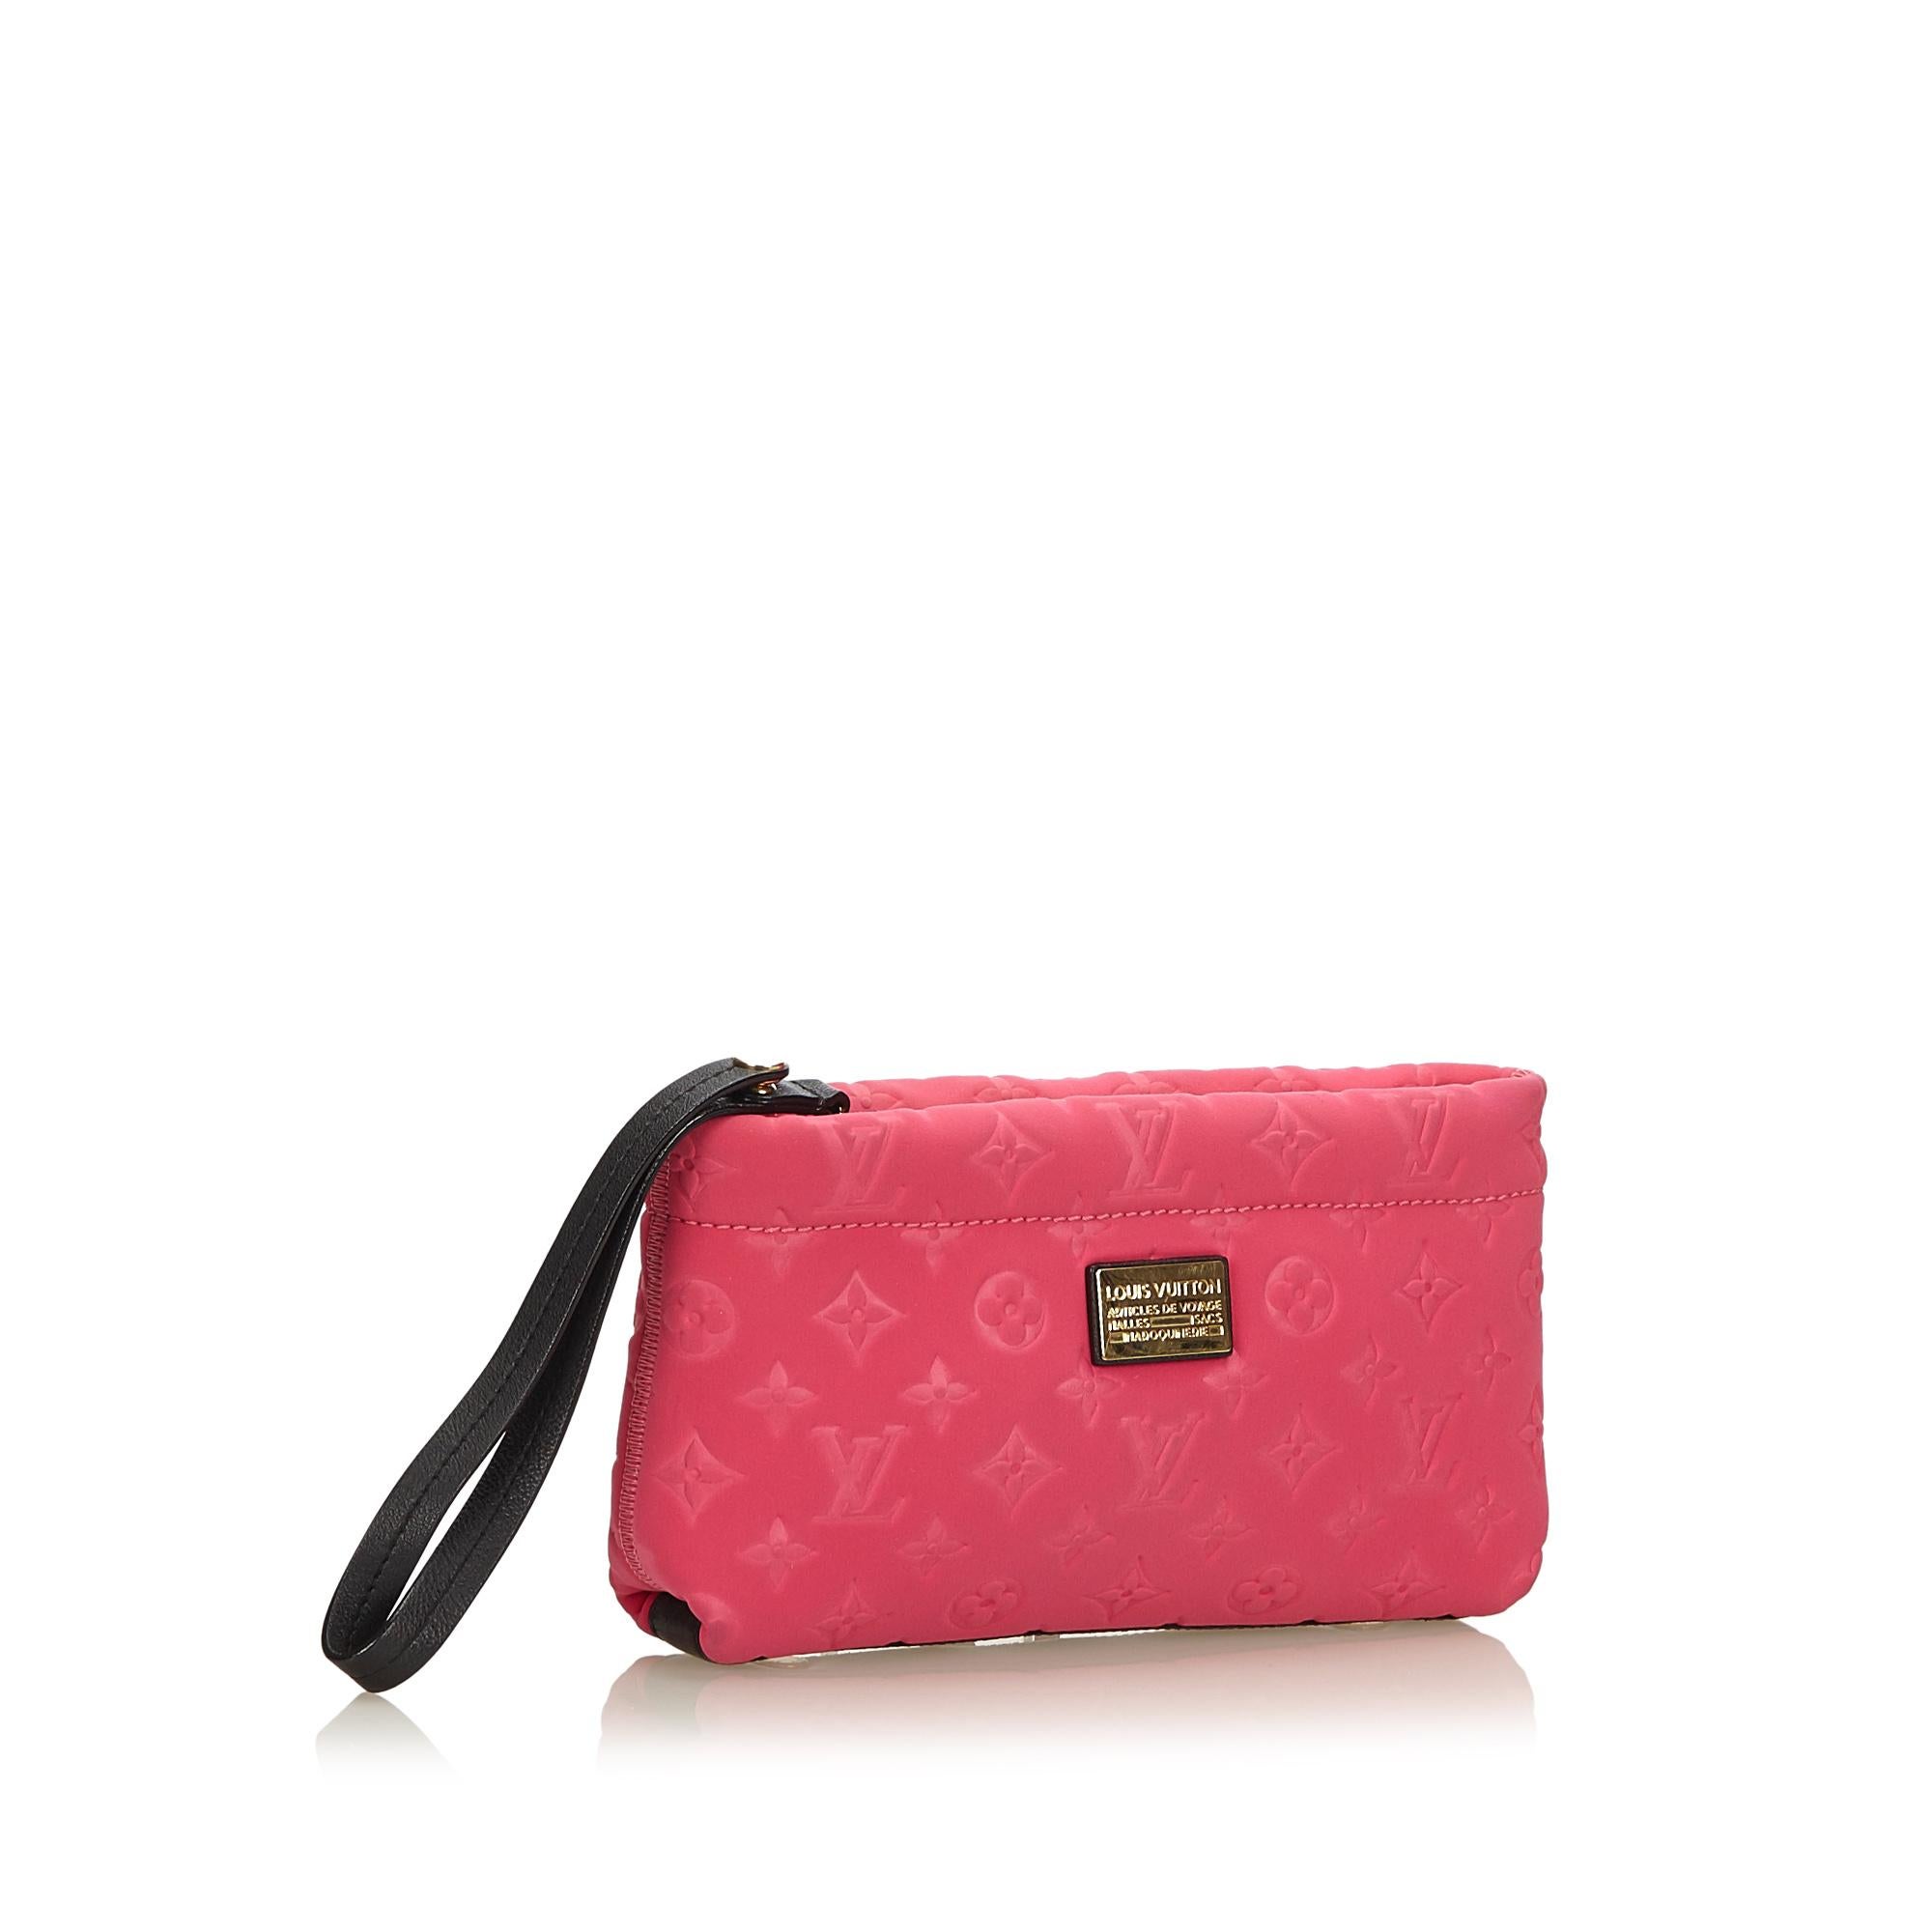 This clutch features a neoprene body, leather wristlet, and a top zip closure. It carries as AB condition rating.

Inclusions: 
Dust Bag
Box


Louis Vuitton pieces do not come with an authenticity card�please refer to the production date code within